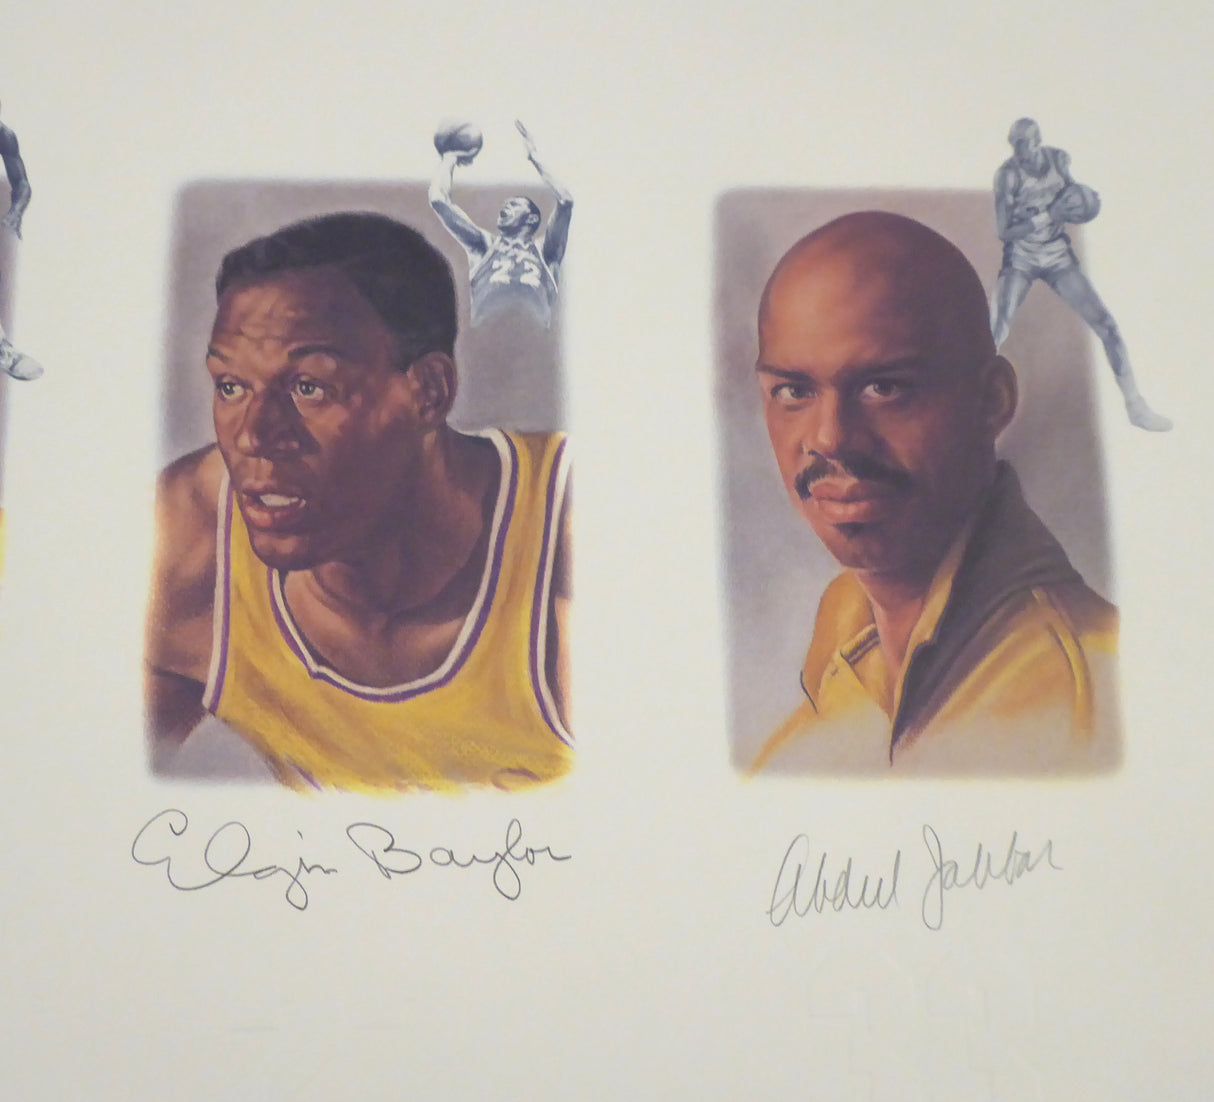 Los Angeles Lakers Legends Autographed Lithograph With 5 Signatures Including Wilt Chamberlain, West, Johnson, Baylor & Abdul-Jabbar #/1992 Beckett BAS Stock #195250